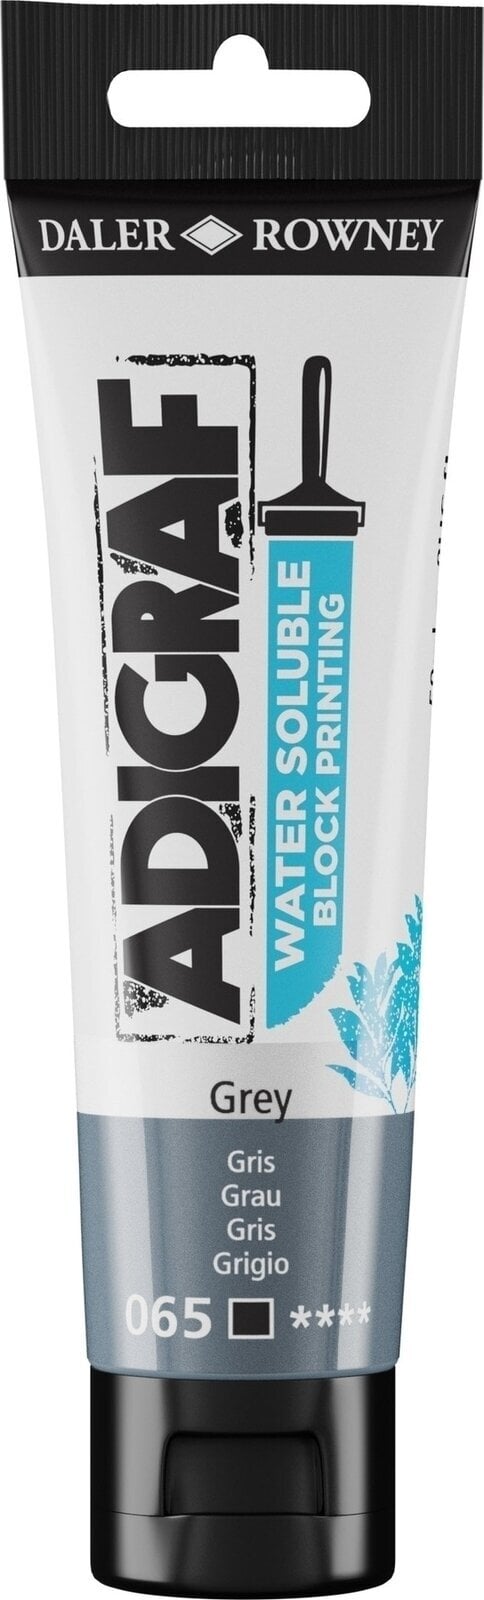 Paint For Linocut Daler Rowney Adigraf Block Printing Water Soluble Colour Paint For Linocut Grey 59 ml